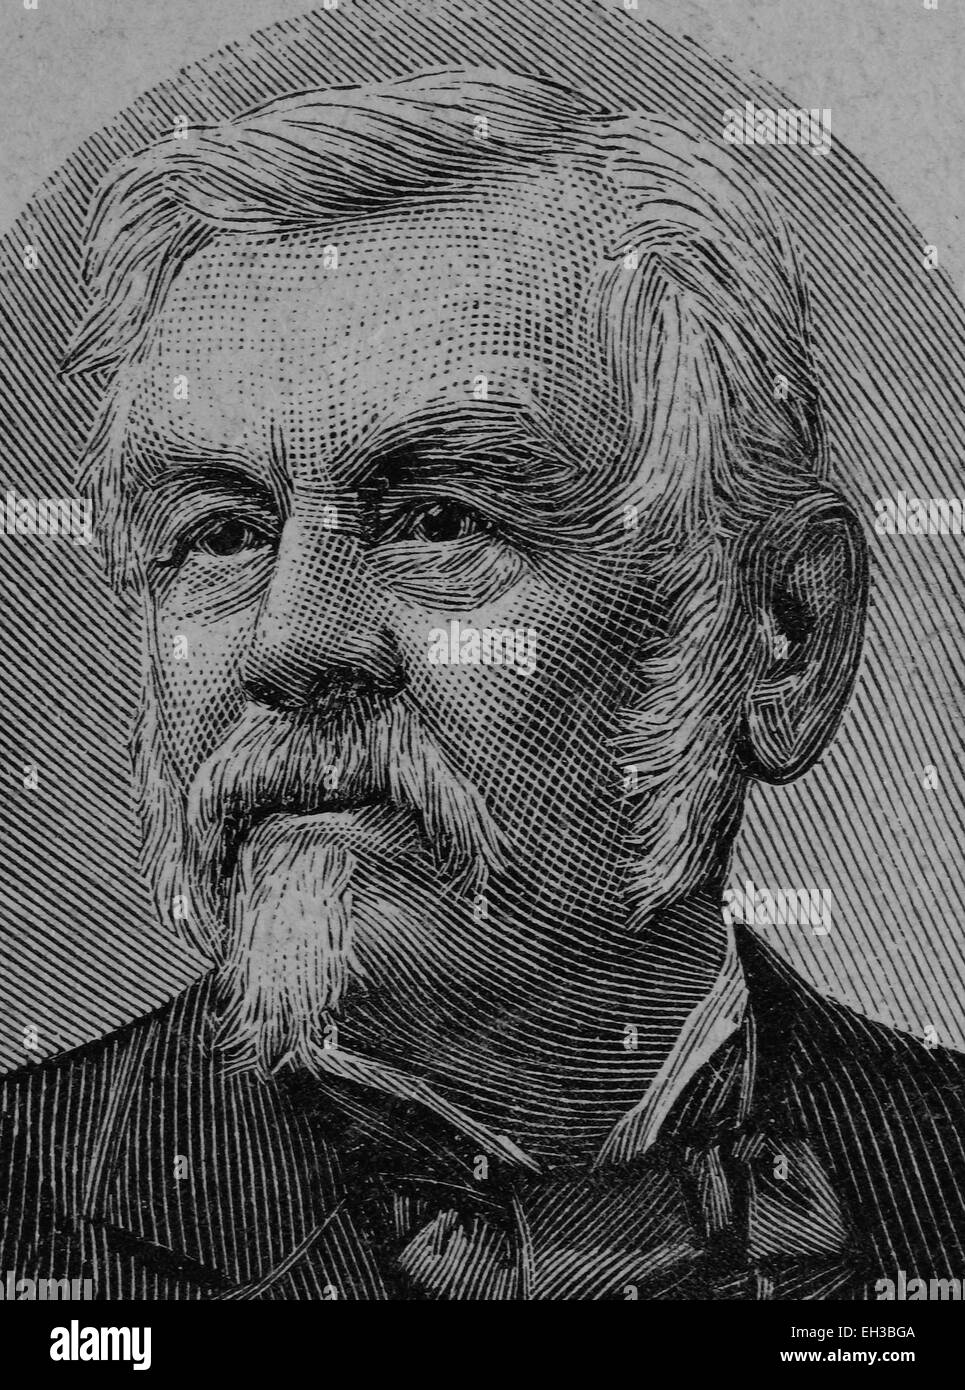 Carl Friedrich Wilhelm Jordan, 1819 - 1904, a German writer and politician, wood engraving, about 1880 Stock Photo